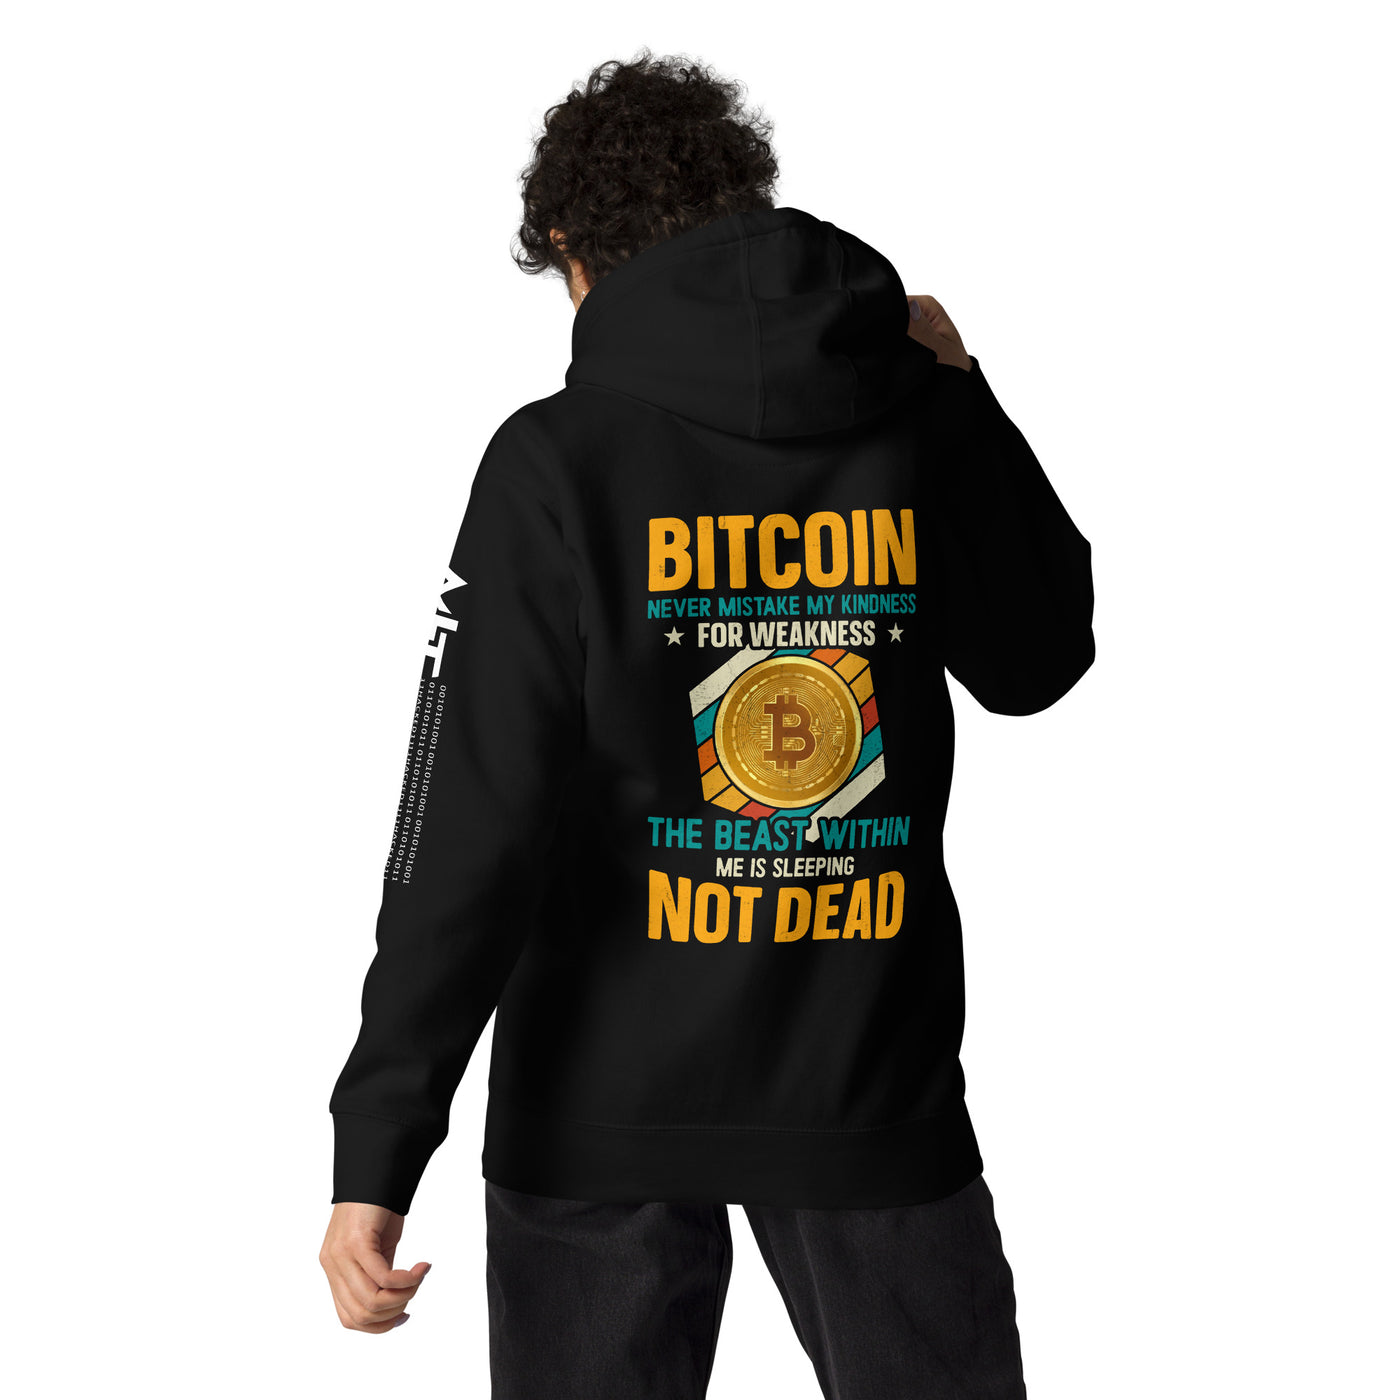 Bitcoin : Never Mistake my Kindness for Weakness - Unisex Hoodie ( Back Print )